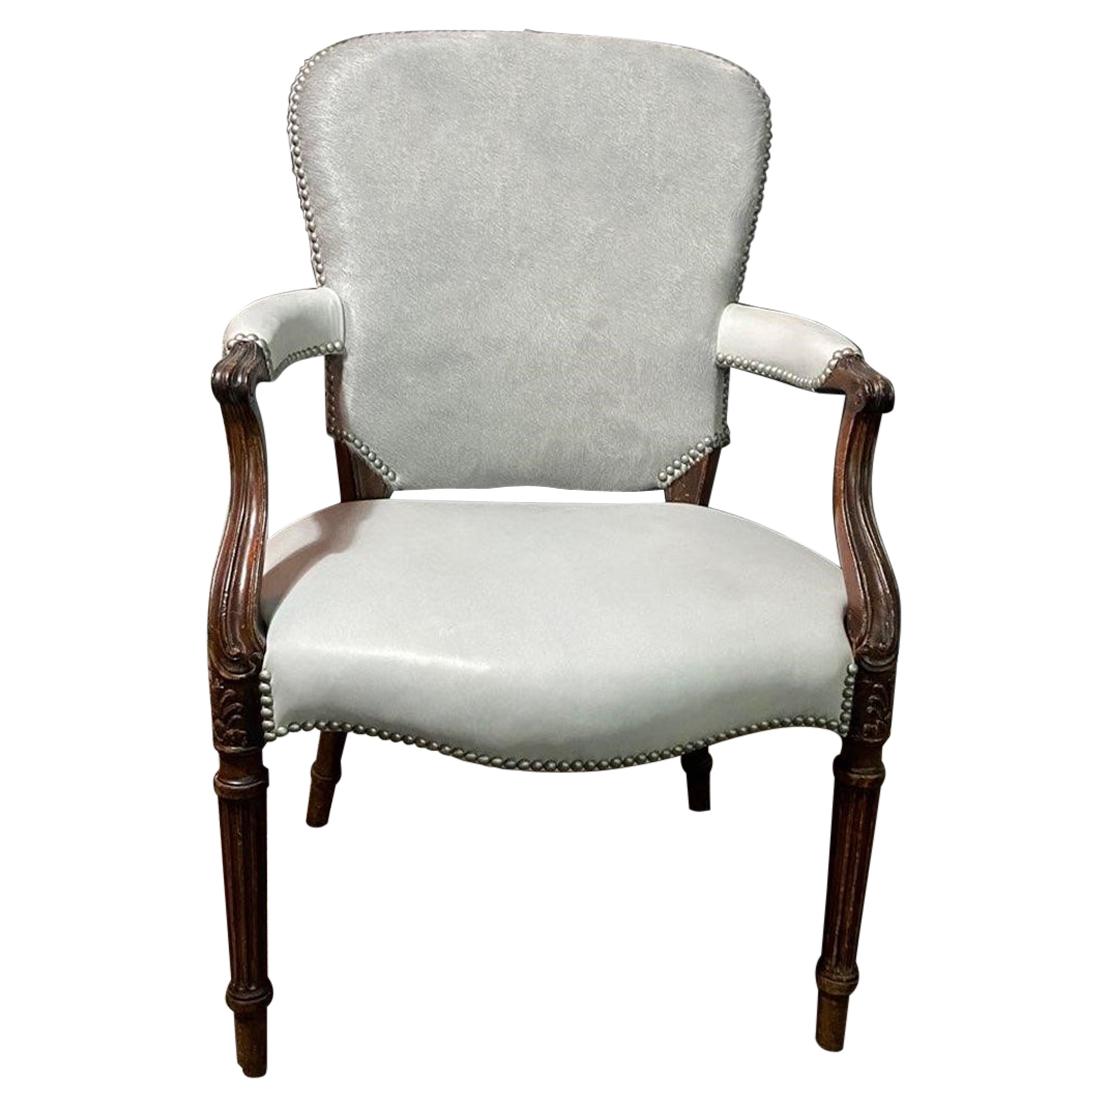 Chic Fauteuil in a Soft Gray Leather Seat and Matching Hair-on-Hide Back